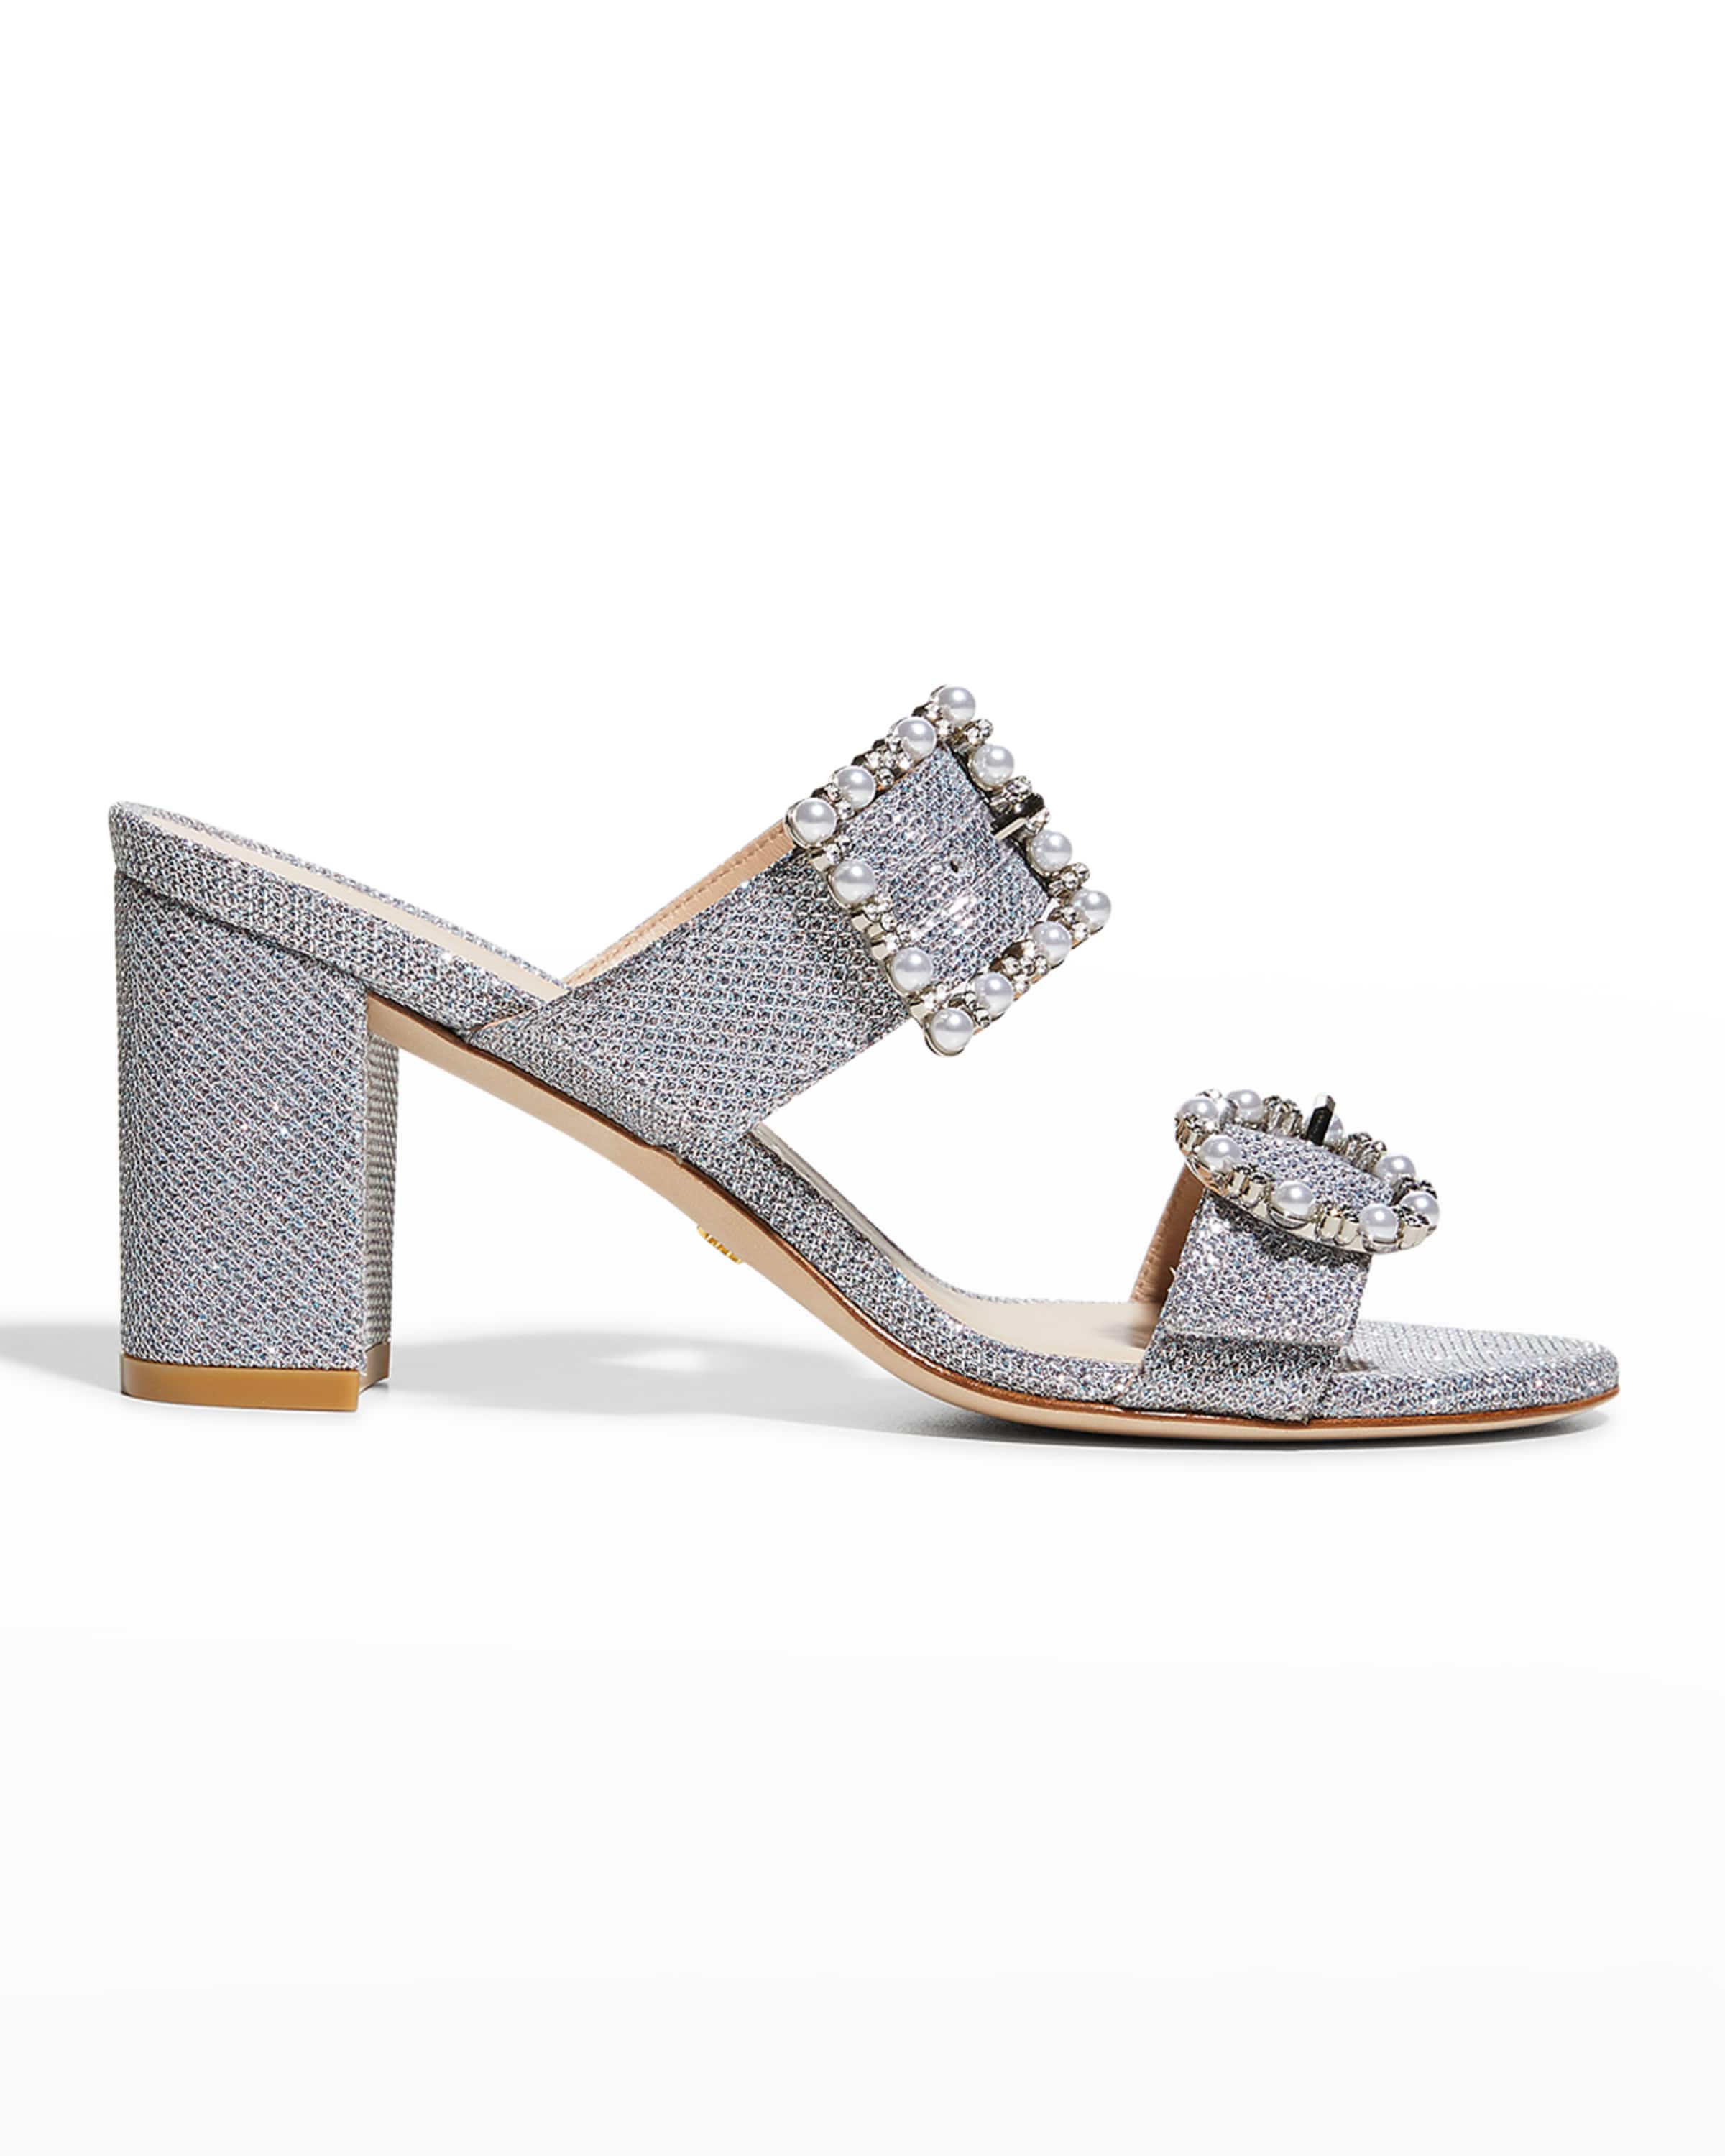 neimanmarcus.com | Pearly Buckle Dual-Band Slide Sandals